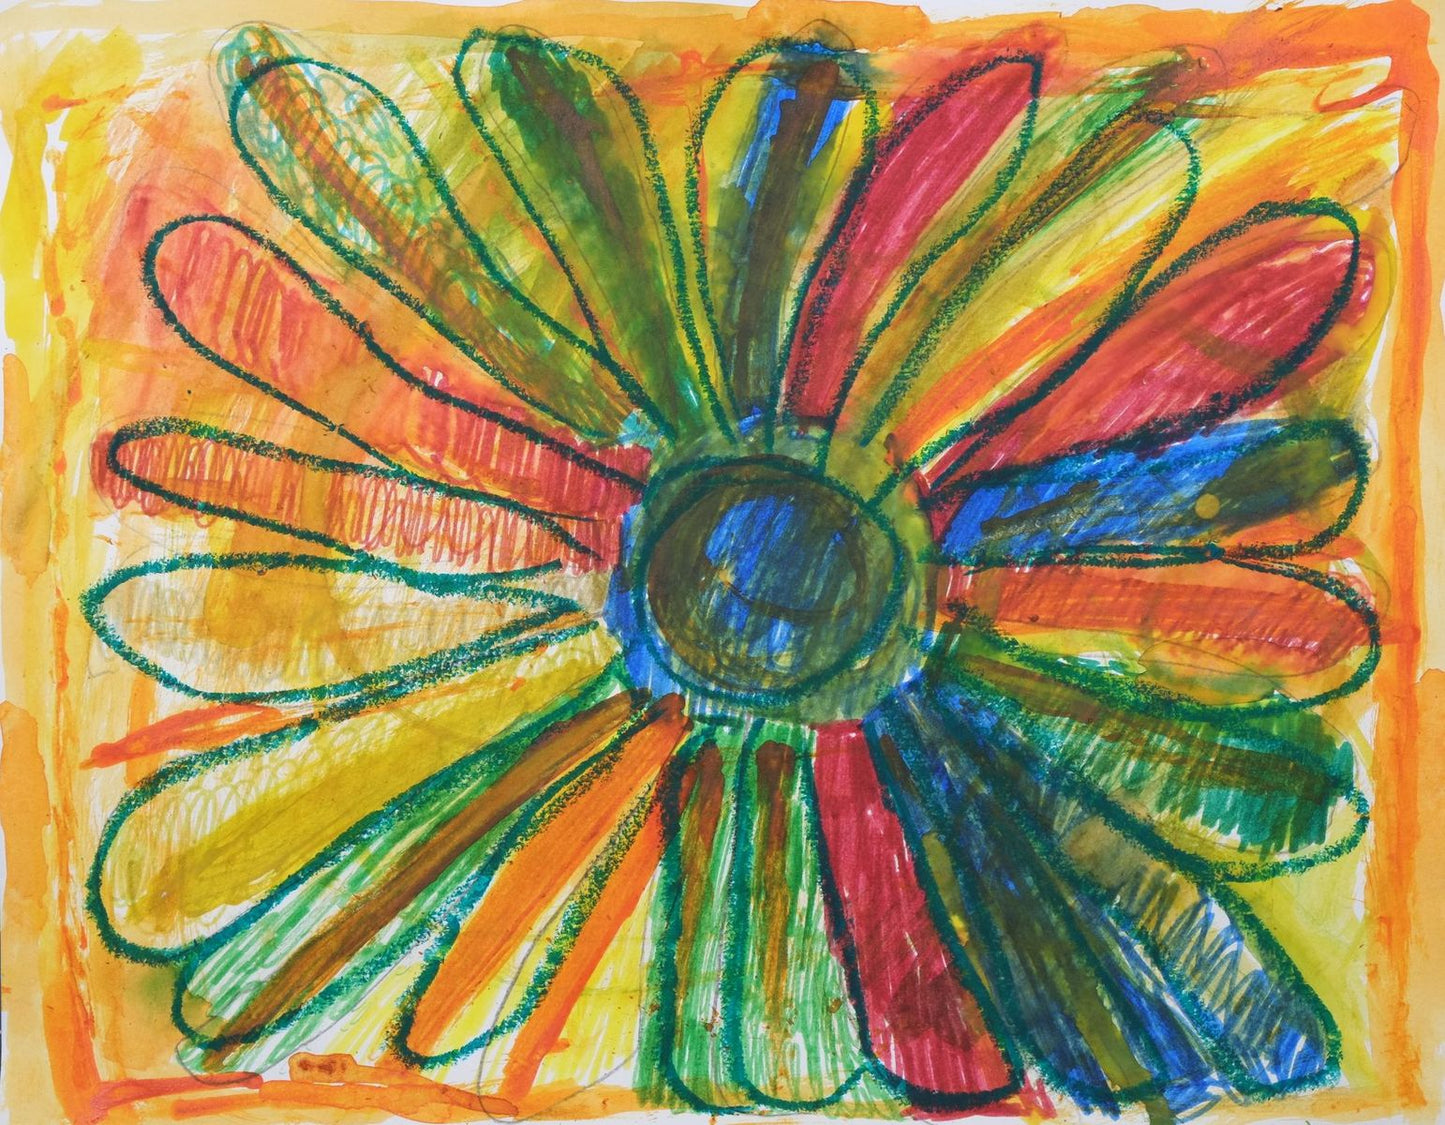 Ink on paper artwork with a light yellow, orange and red background with a large flower outlined in green over top